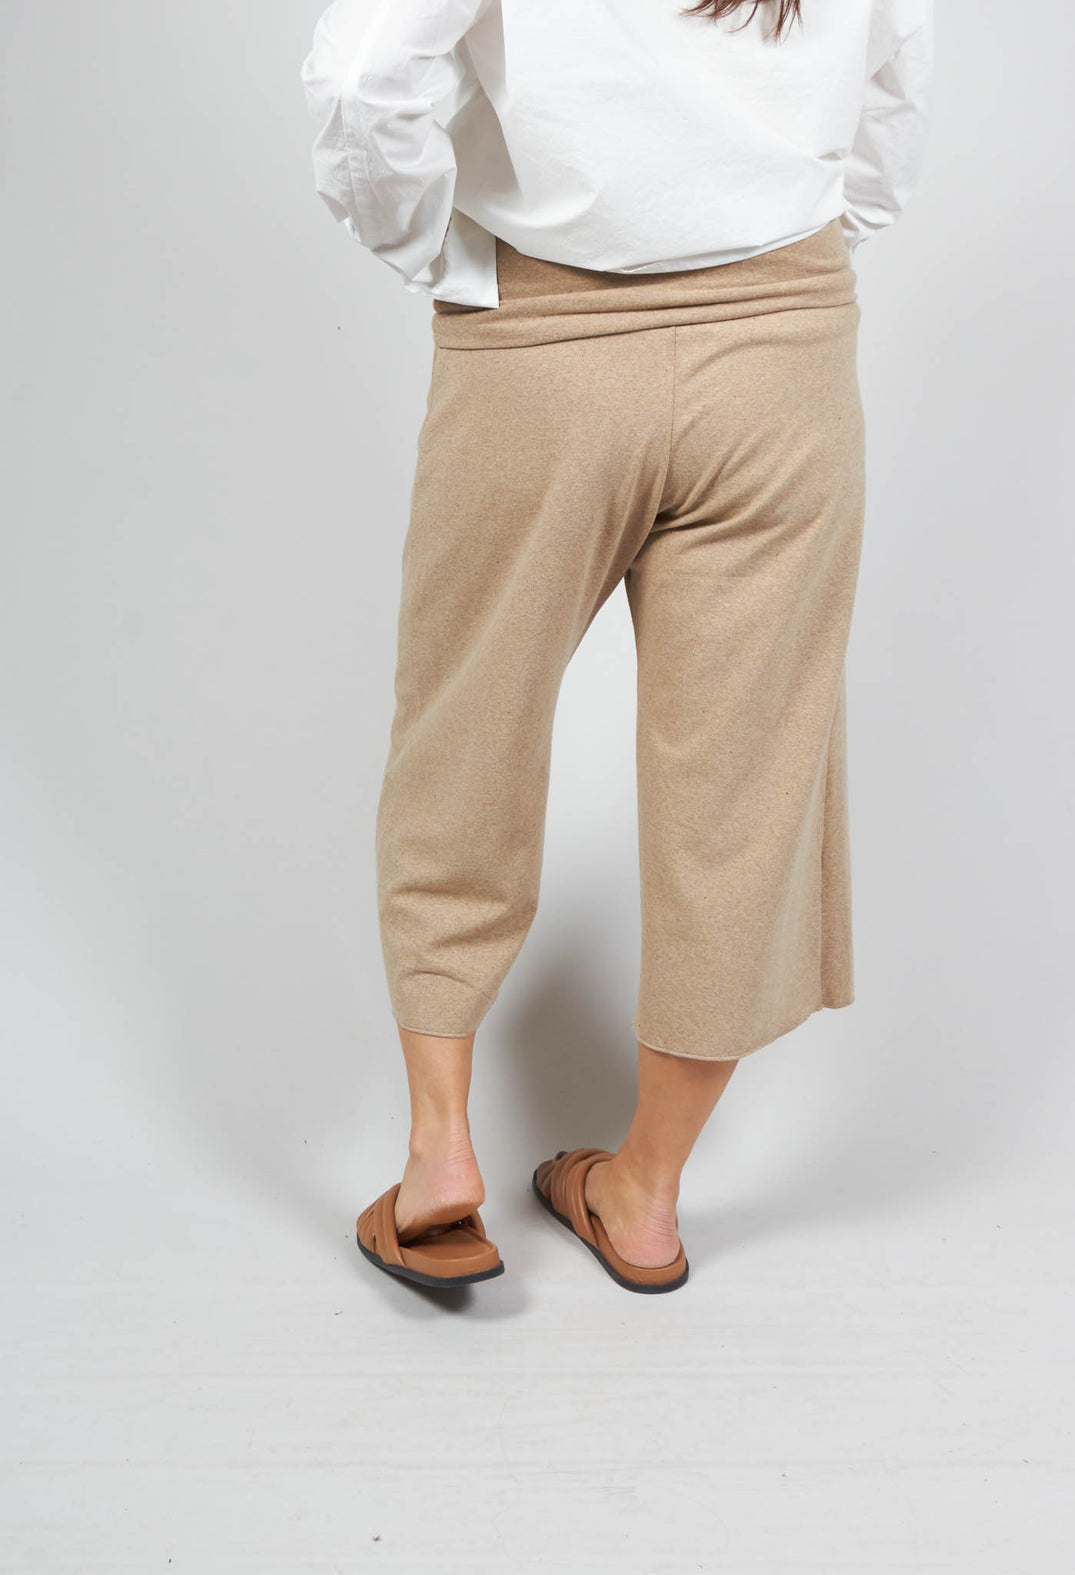 Easy Fit Trousers Eco in Desert